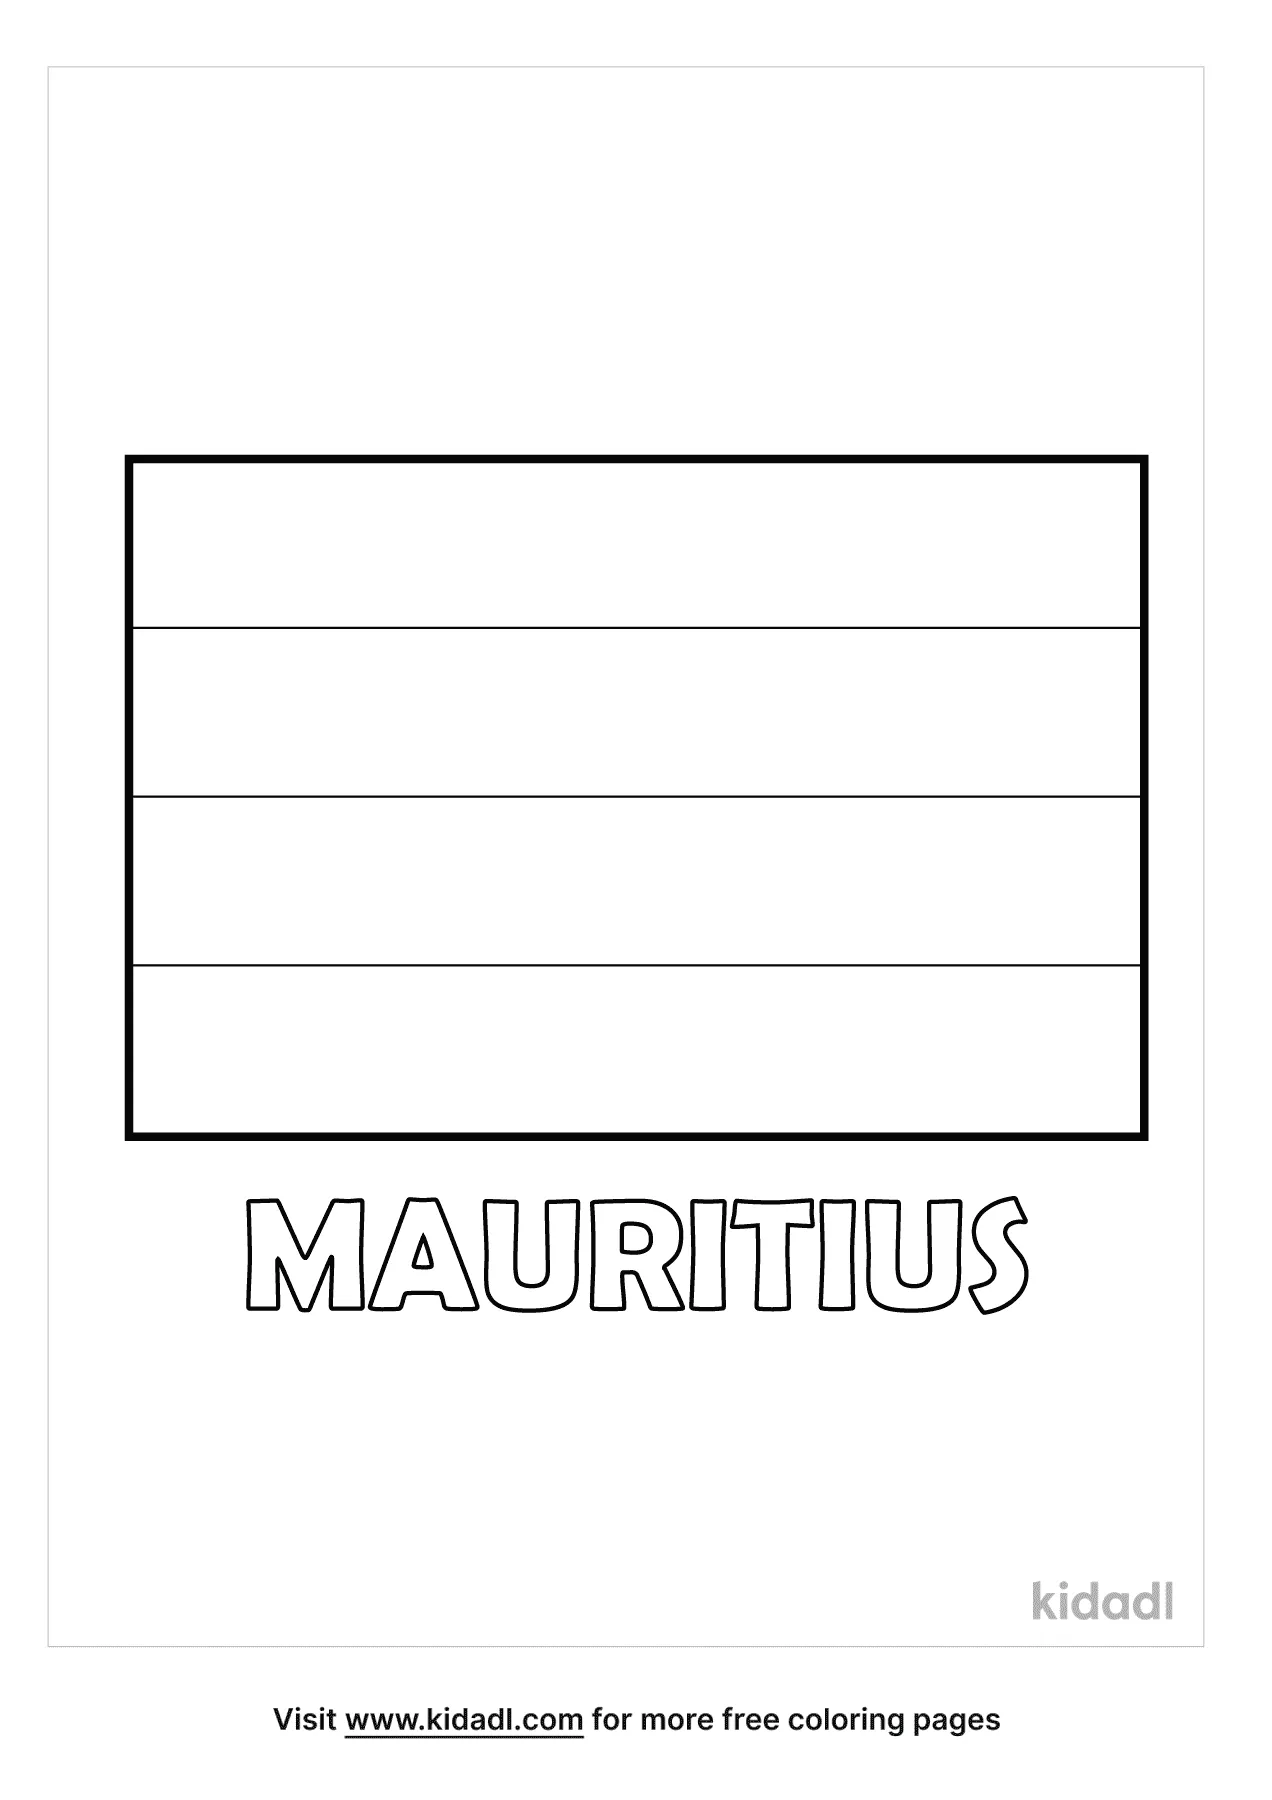 Mauritius Coloring Page